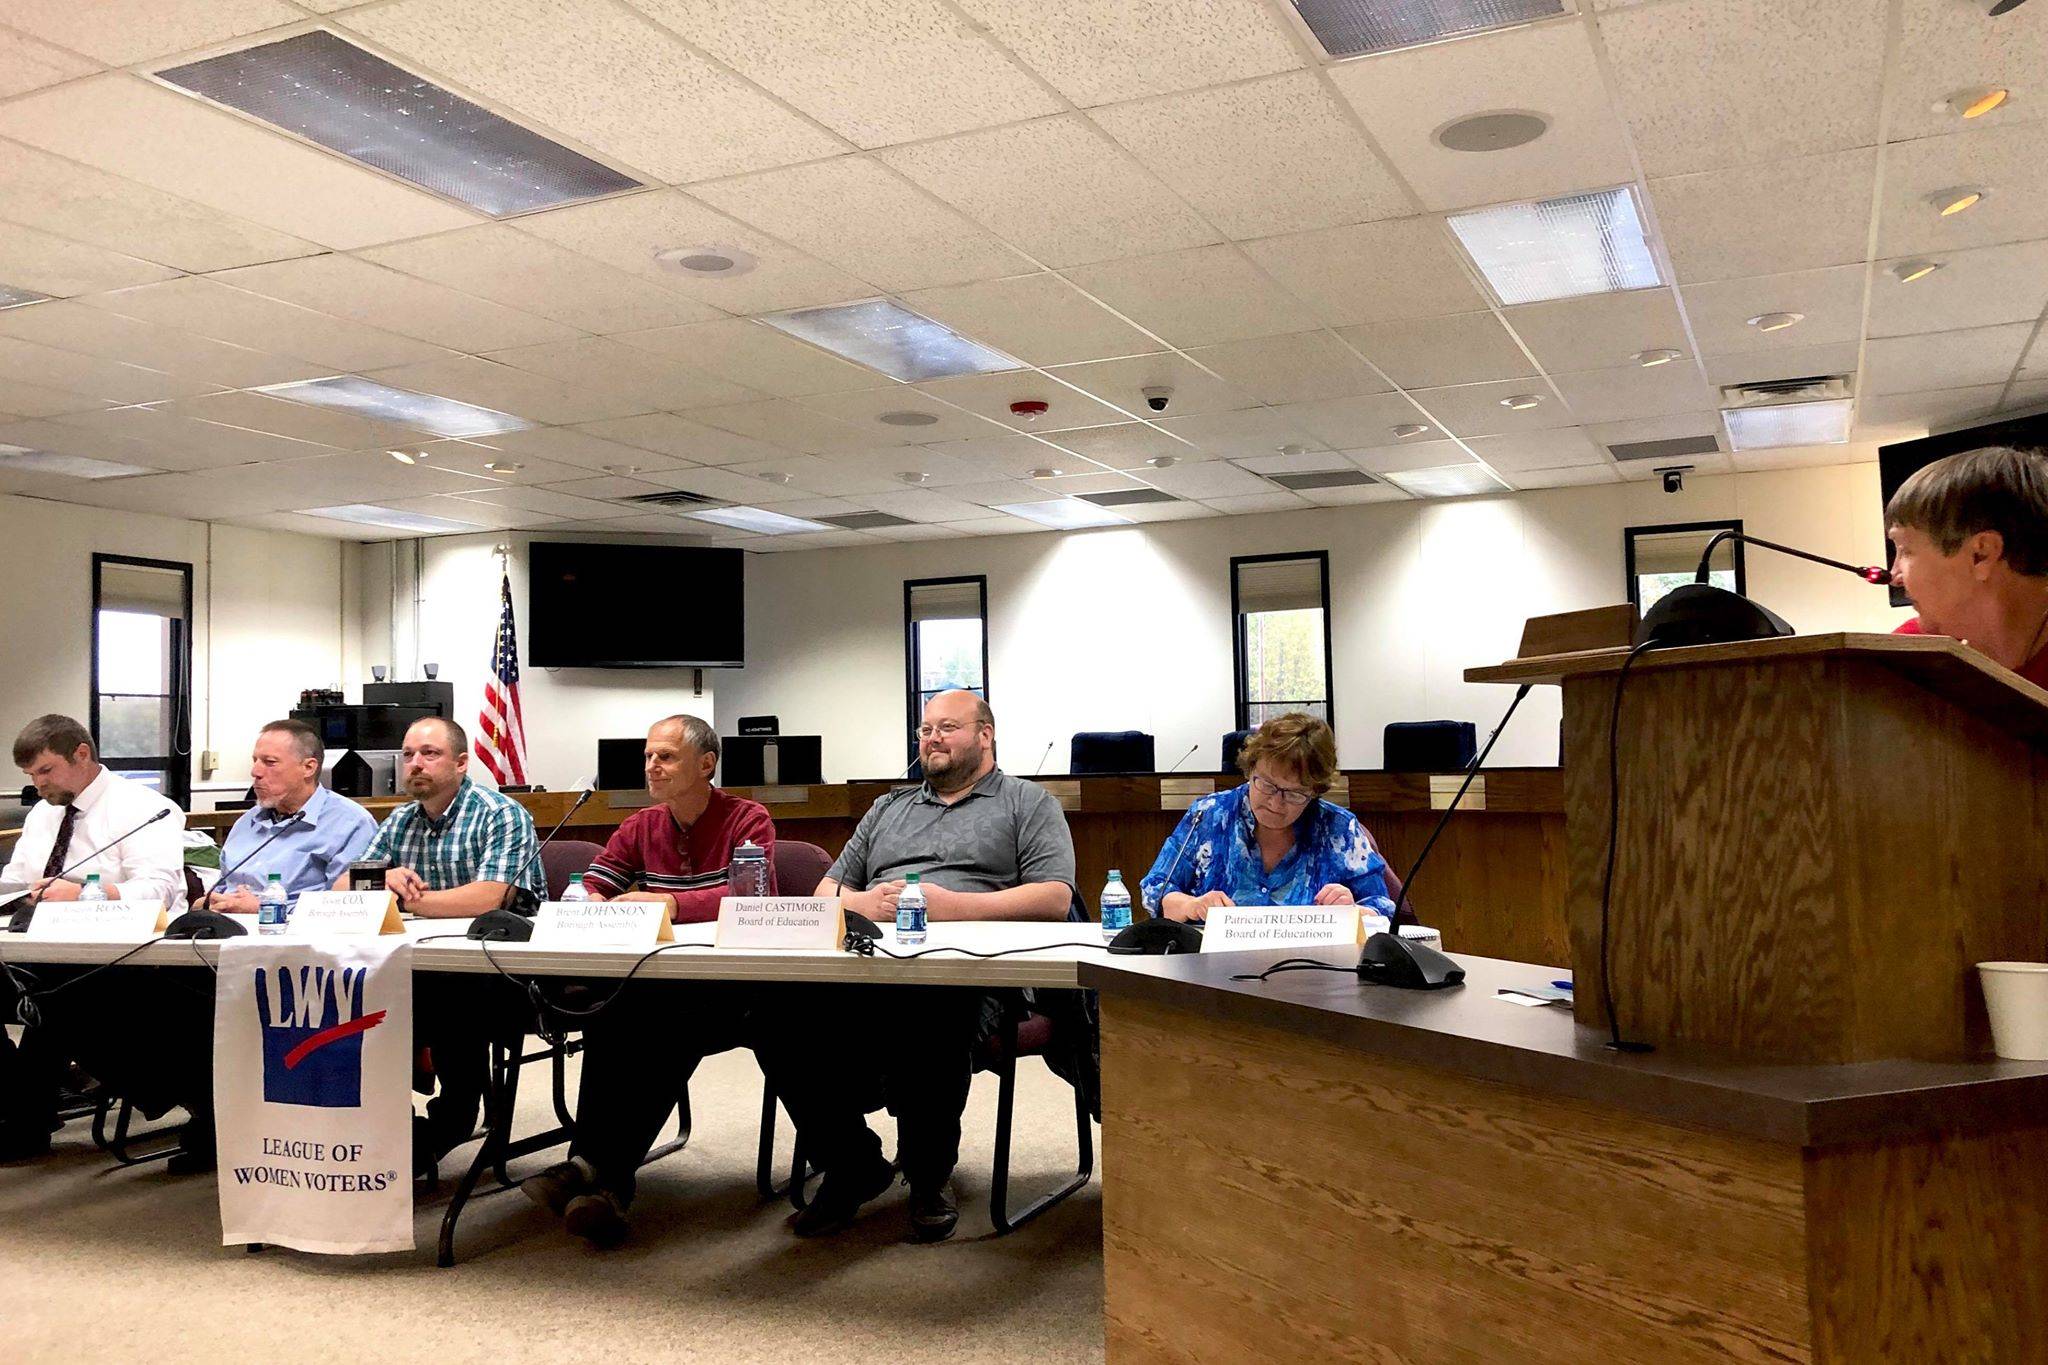 Sammy Crawford, a board member with the League of Women Voters, asks assembly and school board candidates questions at a forum held in on Thursday, Sept. 19 in Soldotna, ahead of the Oct. 1 municipal election. (Photo by Victoria Petersen/Peninsula Clarion)